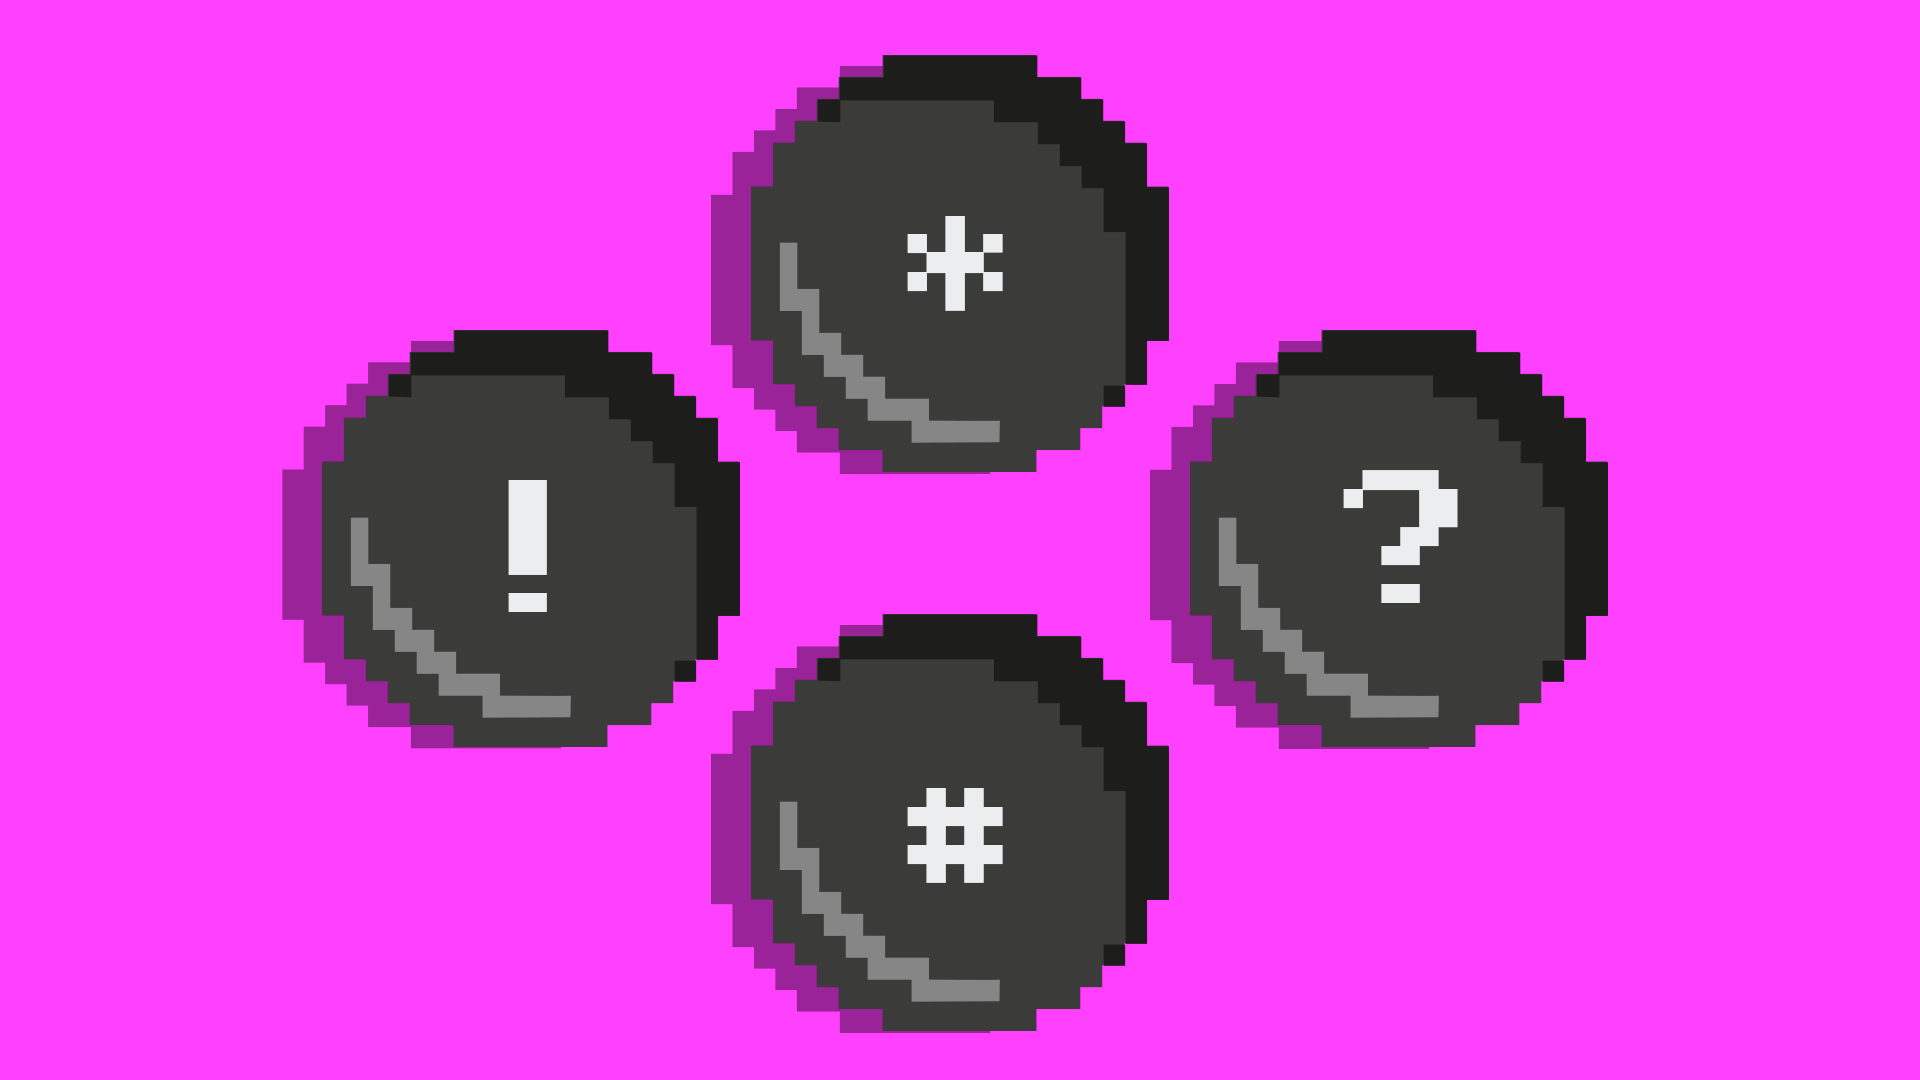 Animated illustration of video game controller buttons stylized with punctuation, one is a question mark and is being pressed repeatedly.